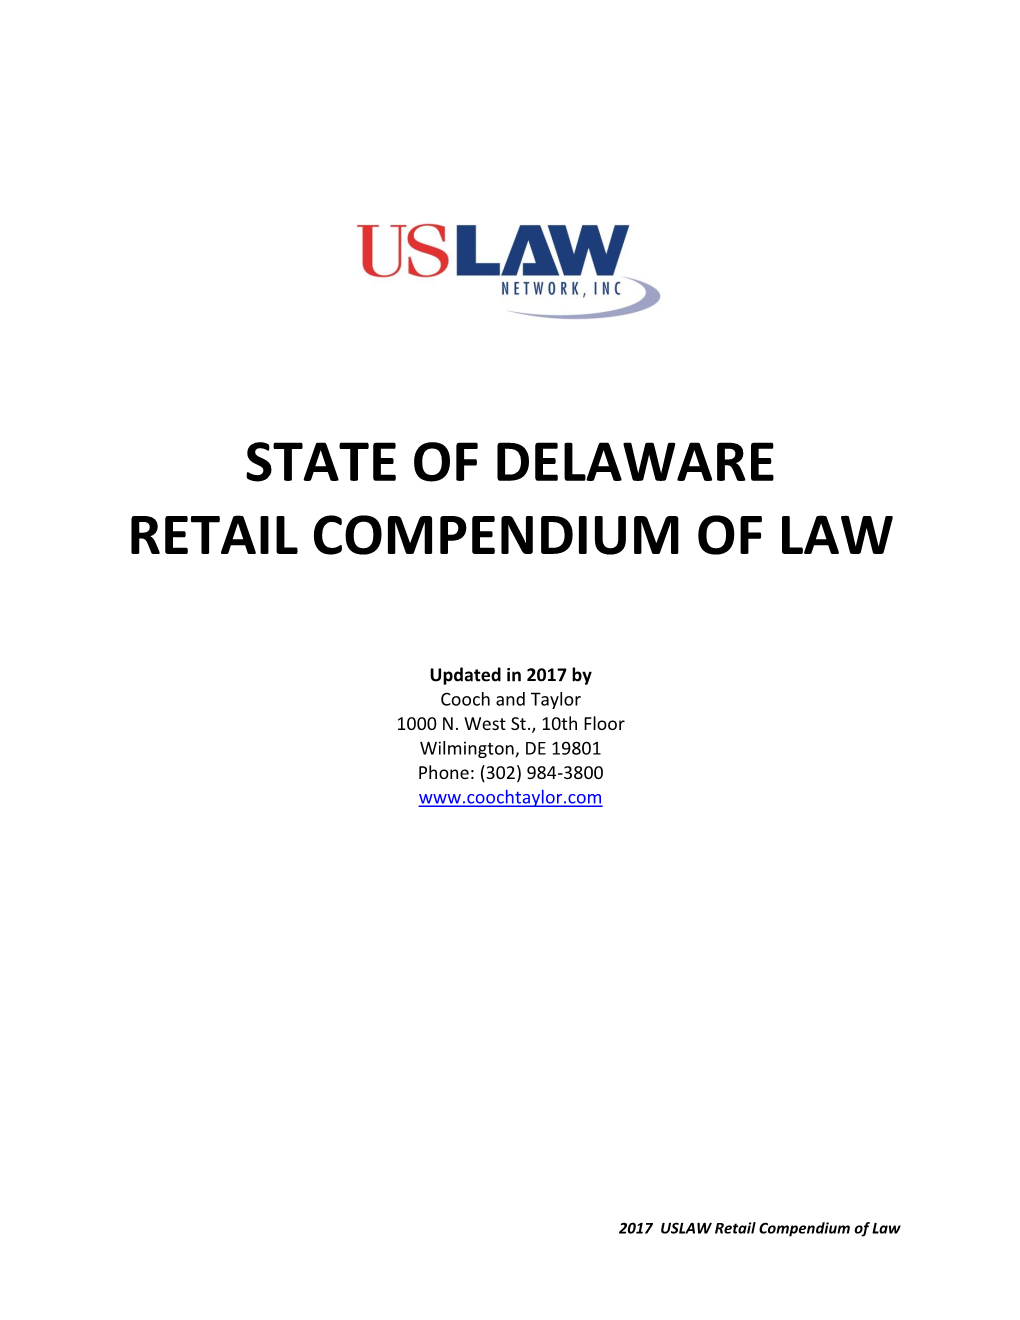 State of Delaware Retail Compendium of Law